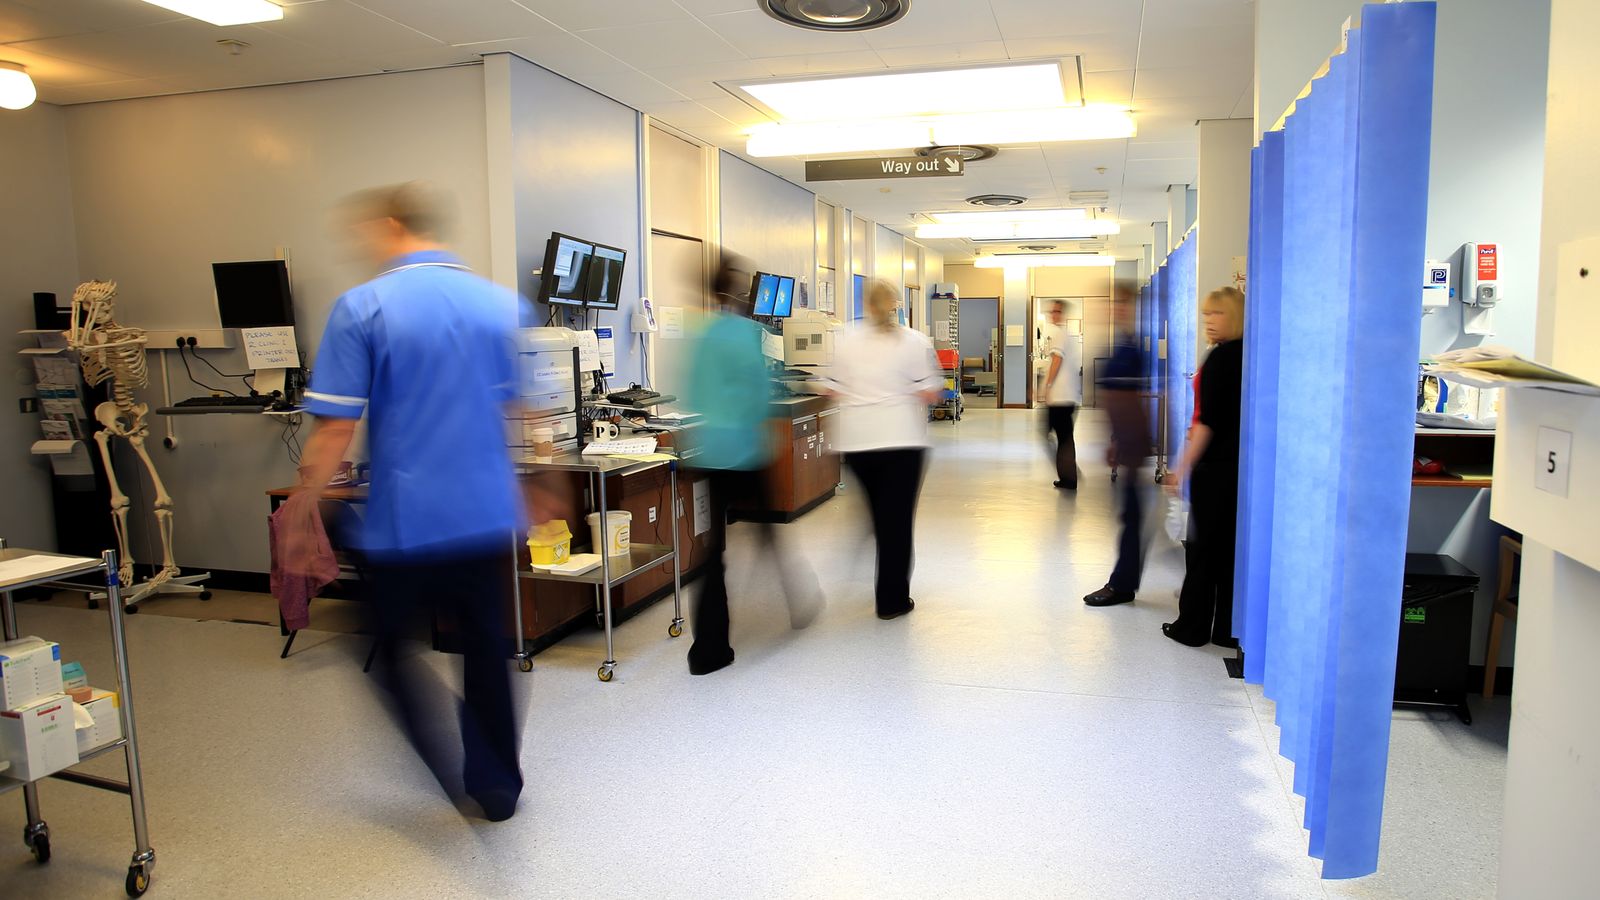 Thousands more NHS workers being balloted for strike action, Unite union says